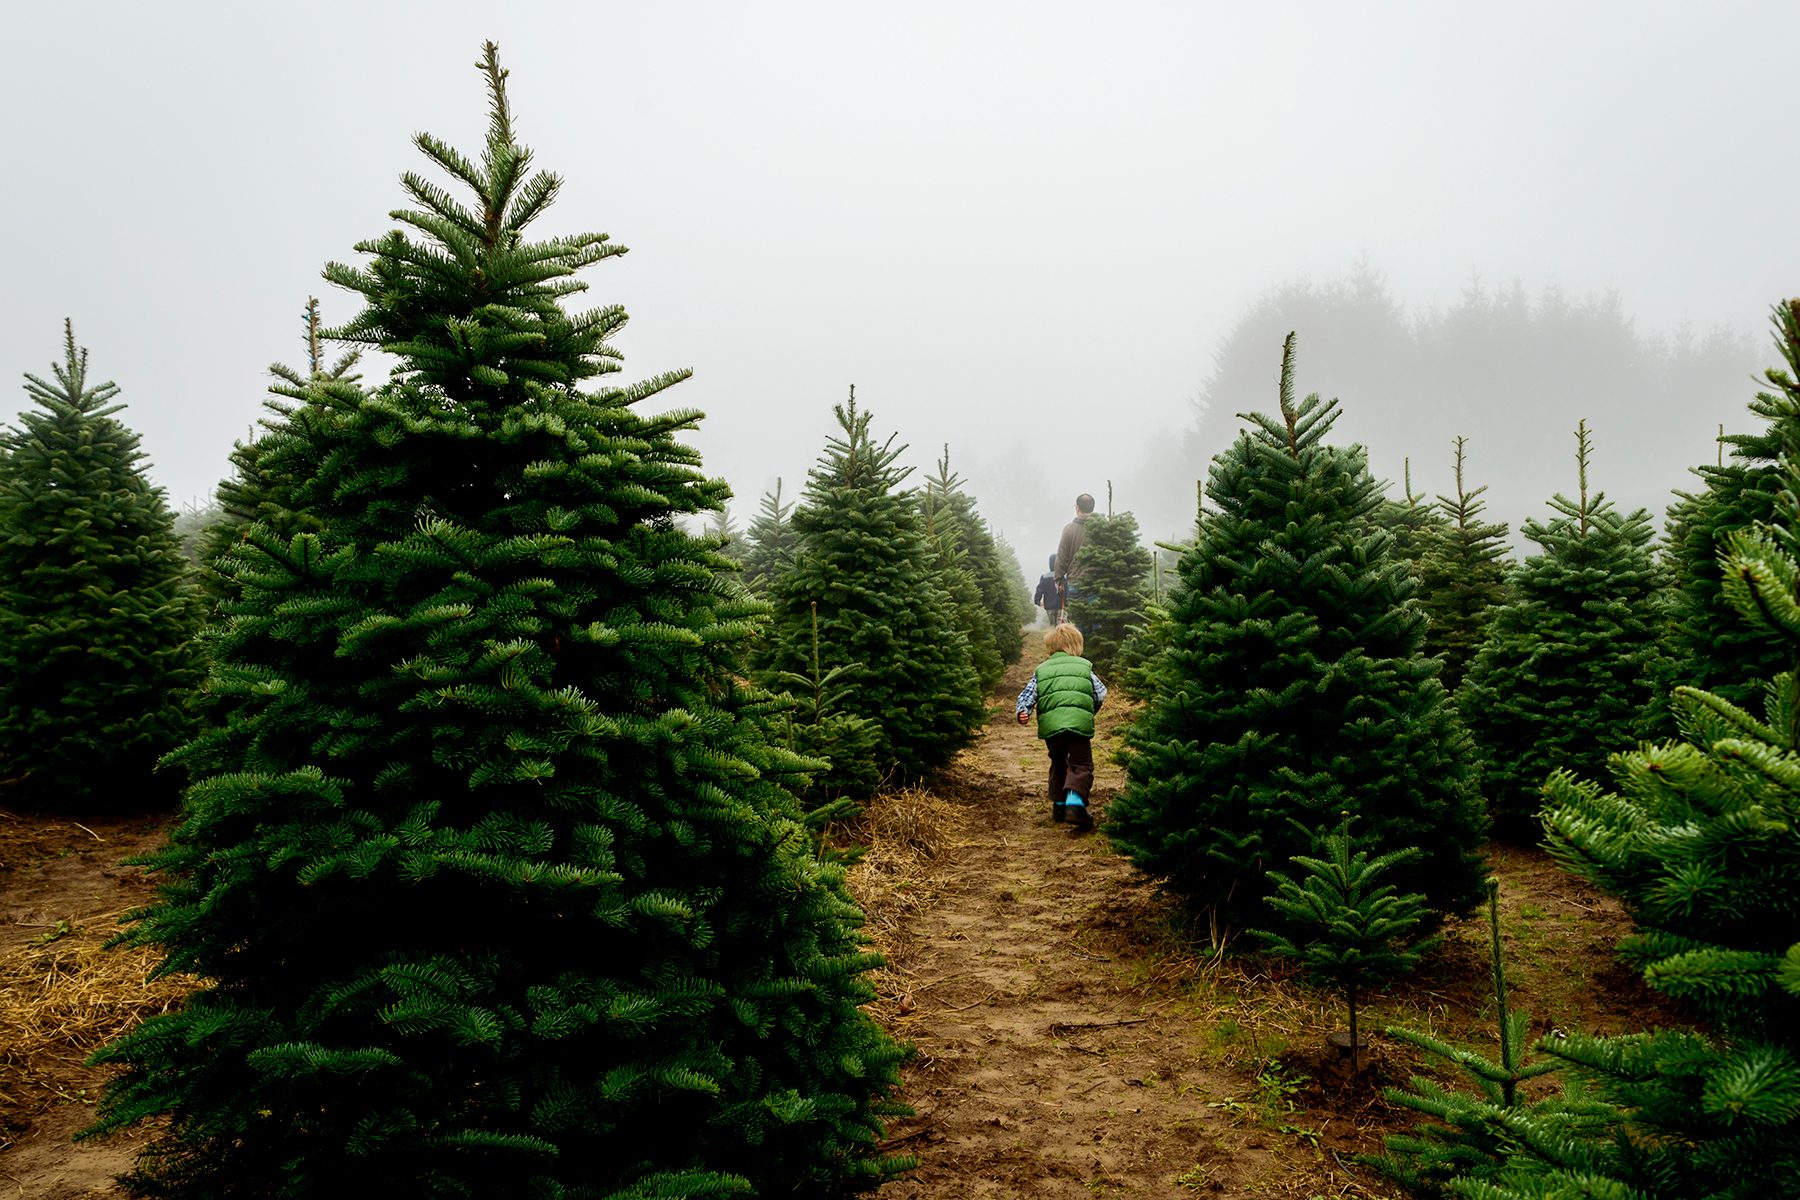 Ever Thought About Starting Your Own Christmas Tree Farm? Here's What to Know